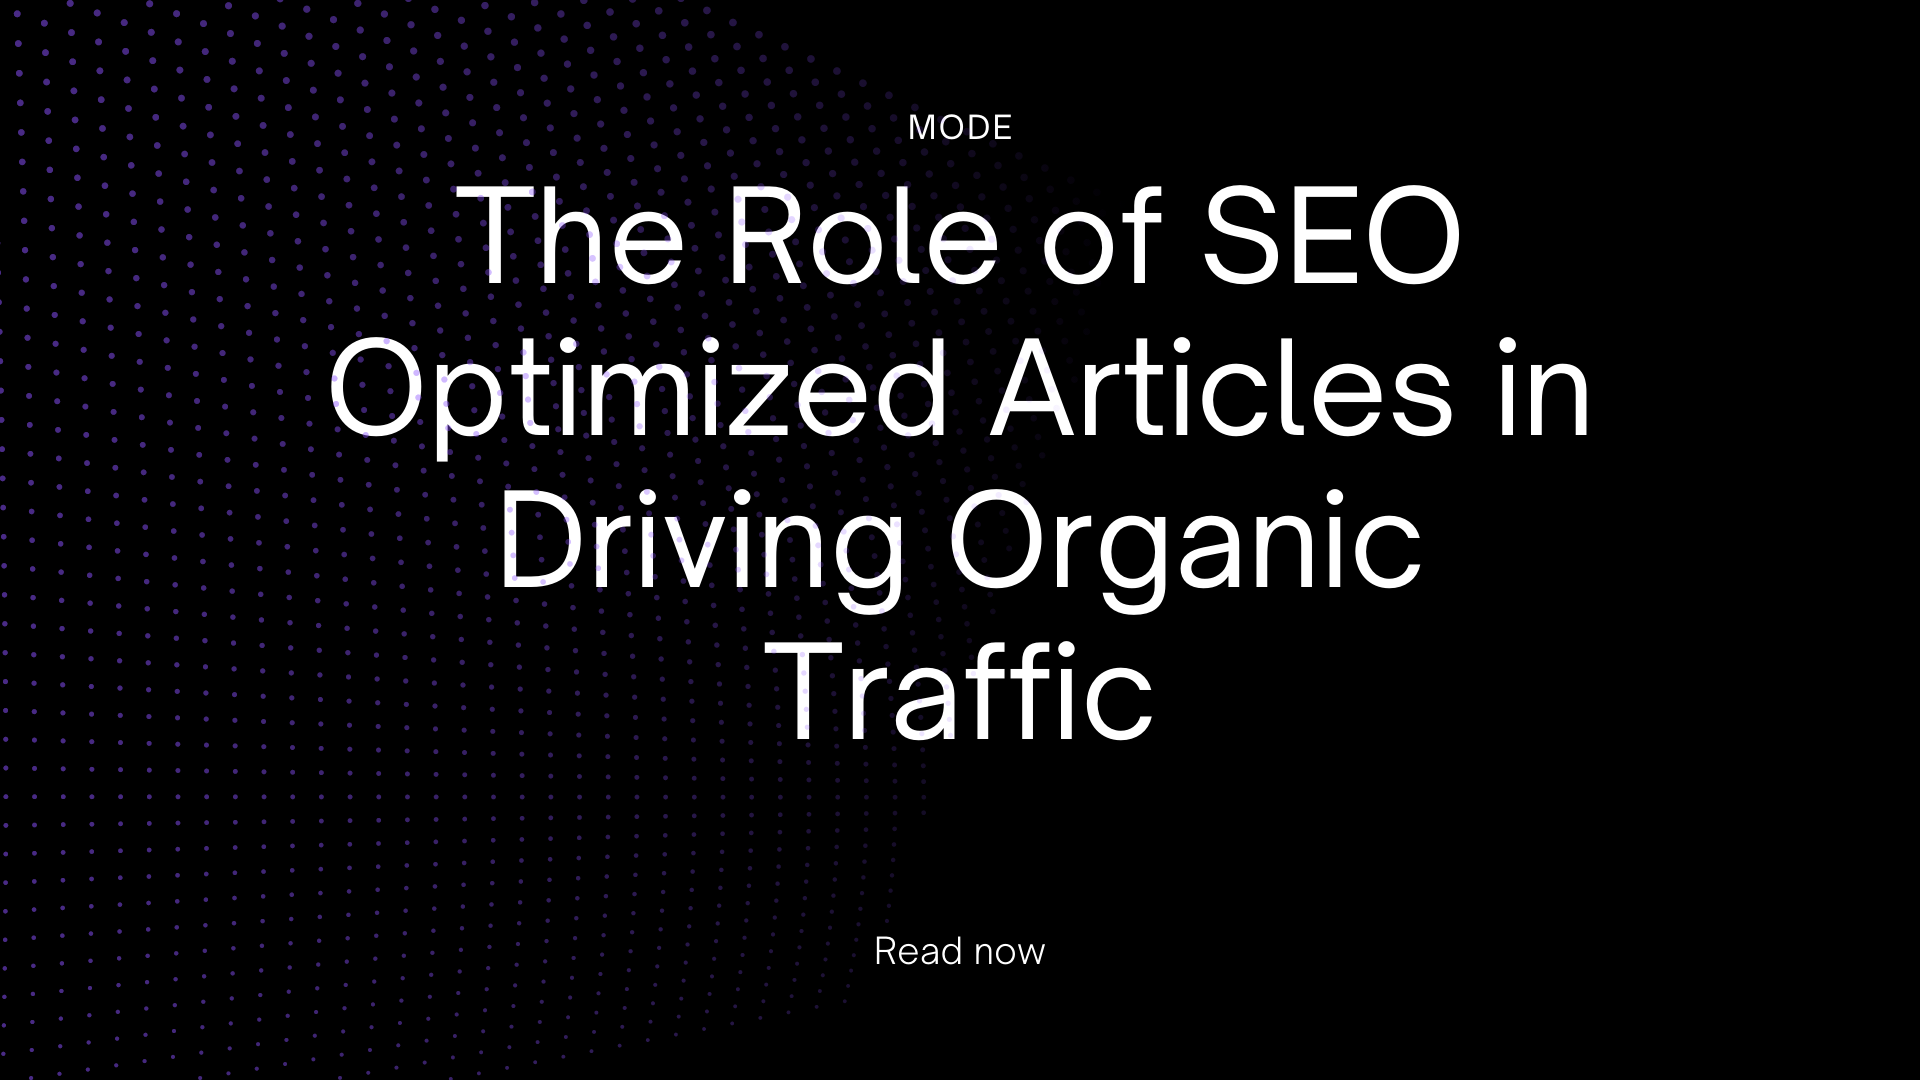 The Role of SEO Optimized Articles in Driving Organic Traffic